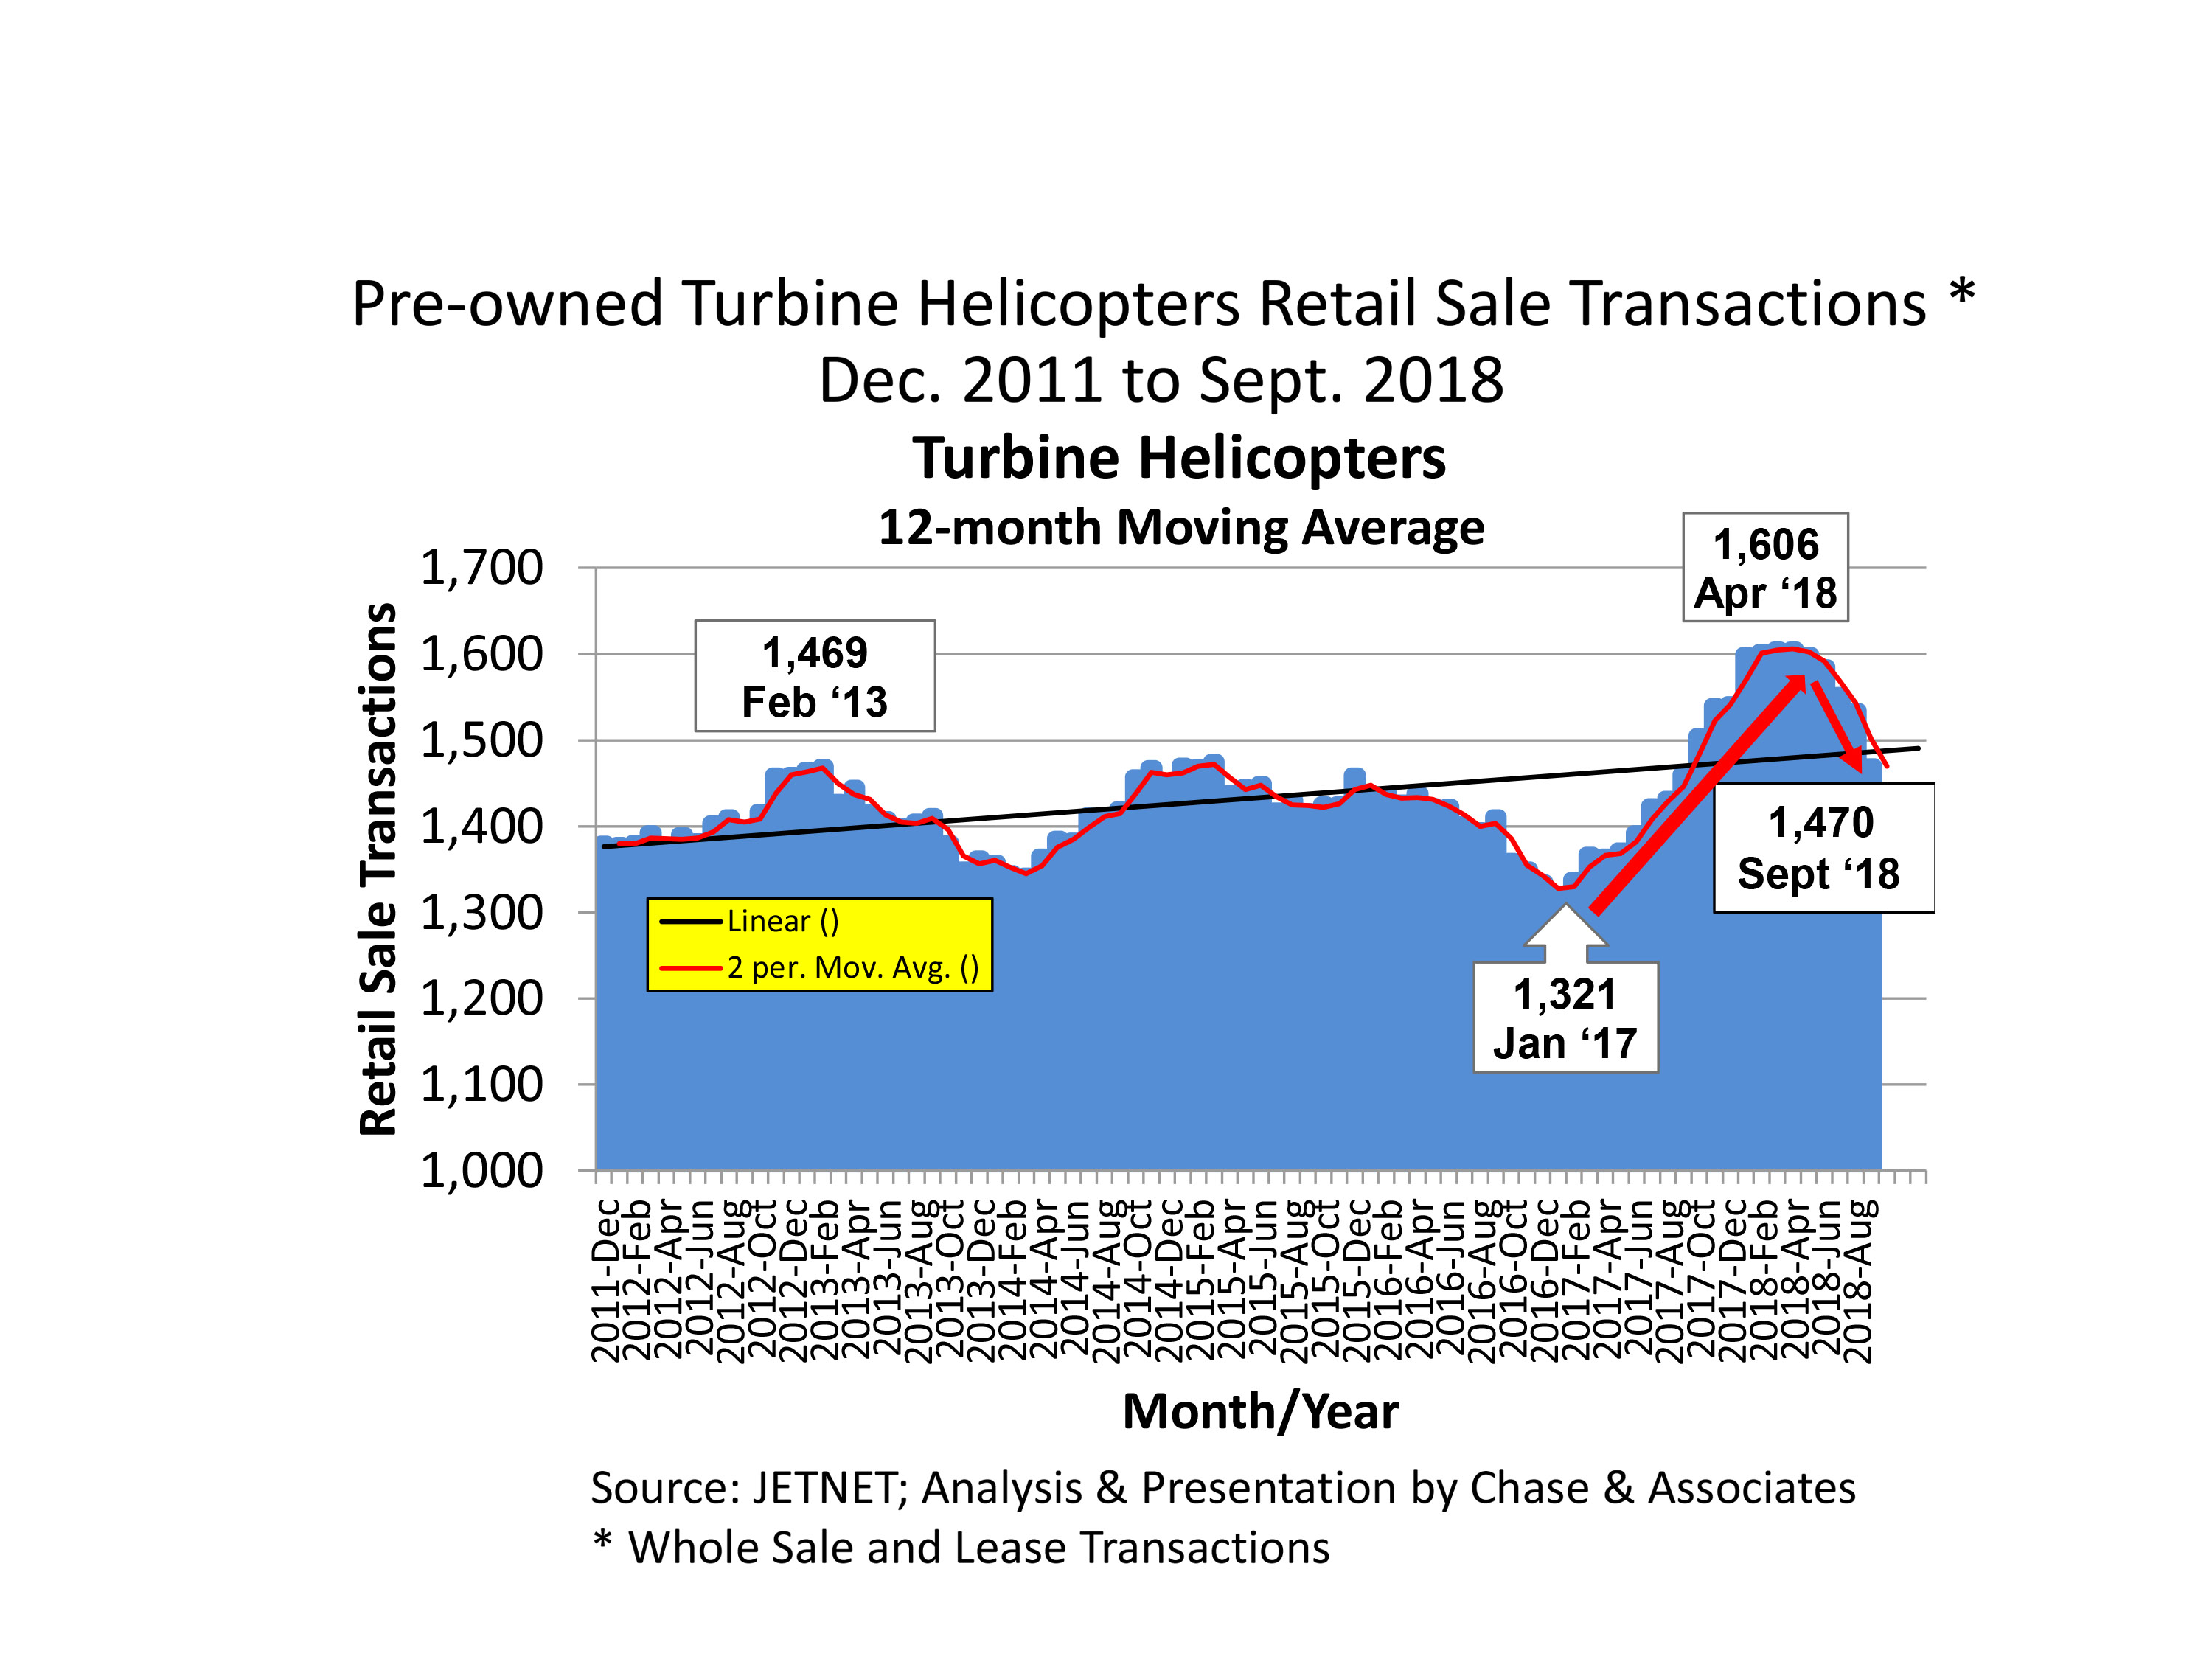 Chart B - Pre-Owned Turbine Helicopter Retail Sale Transactions, Dec. 2011-Sept. 2018